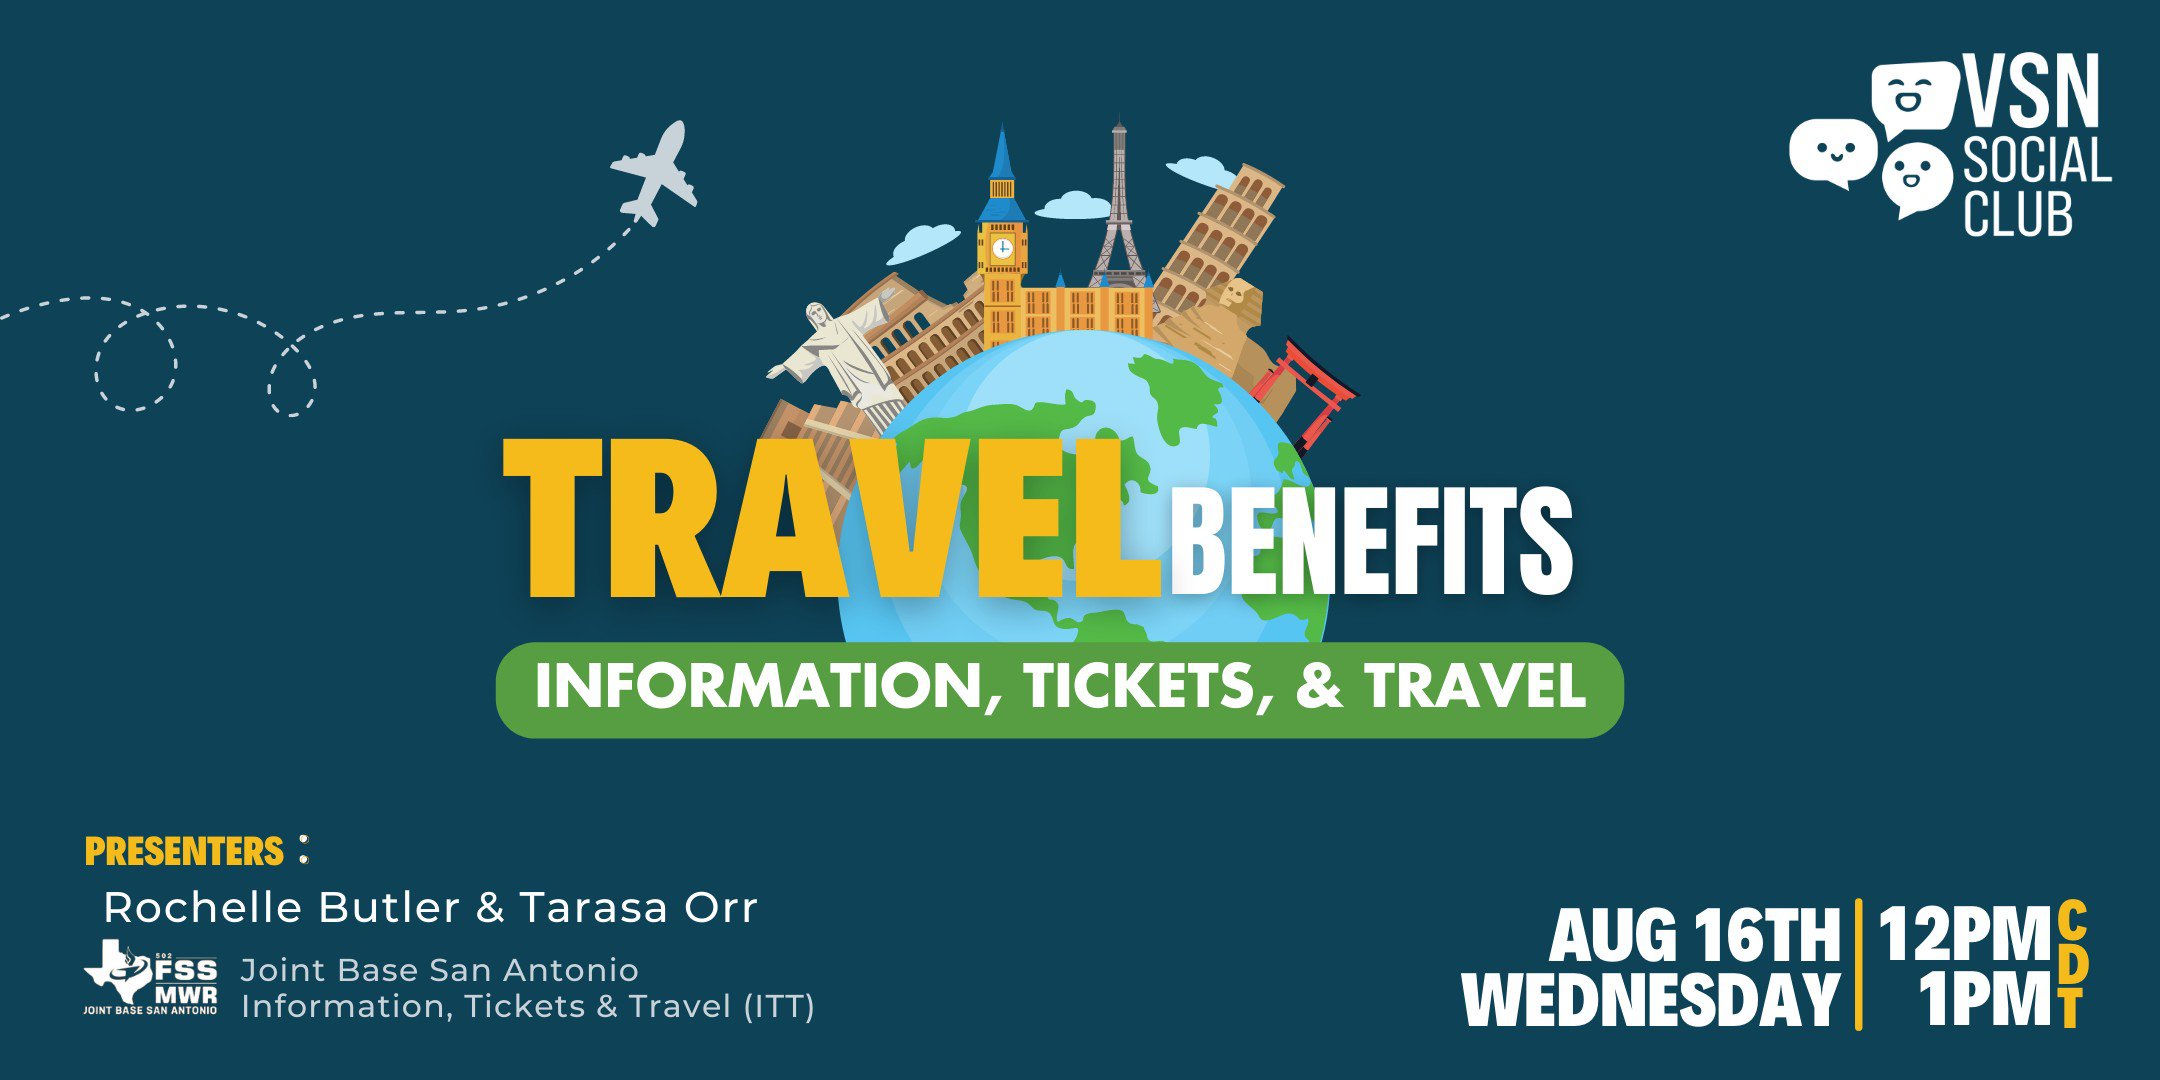 Travel Benefits: Information, Tickets, Travel on Aug 16th